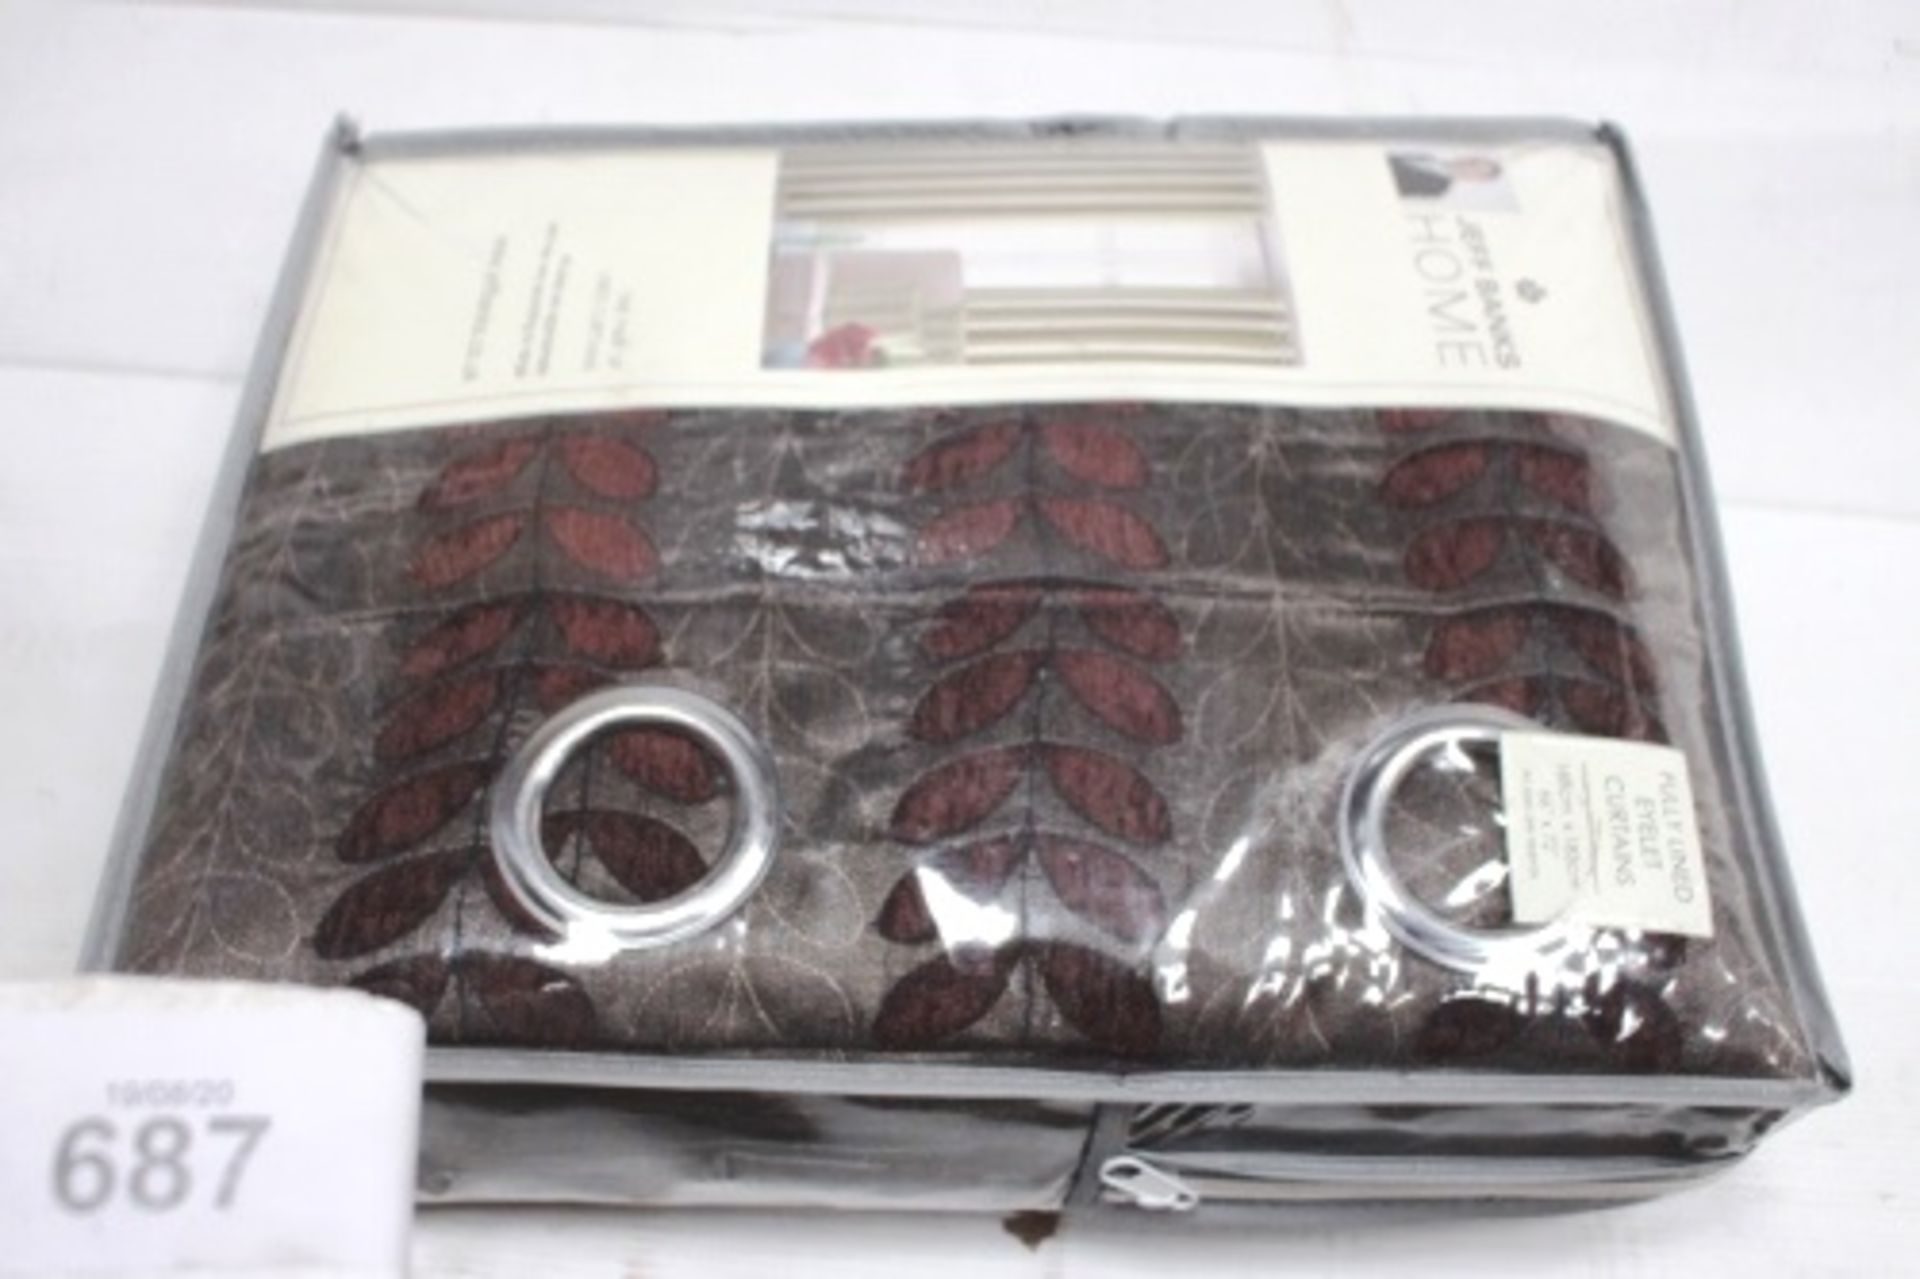 7 x pairs of Jeff Banks Home Sierra lined RME choc lined curtains, size 168 x 183cm - New in pack,